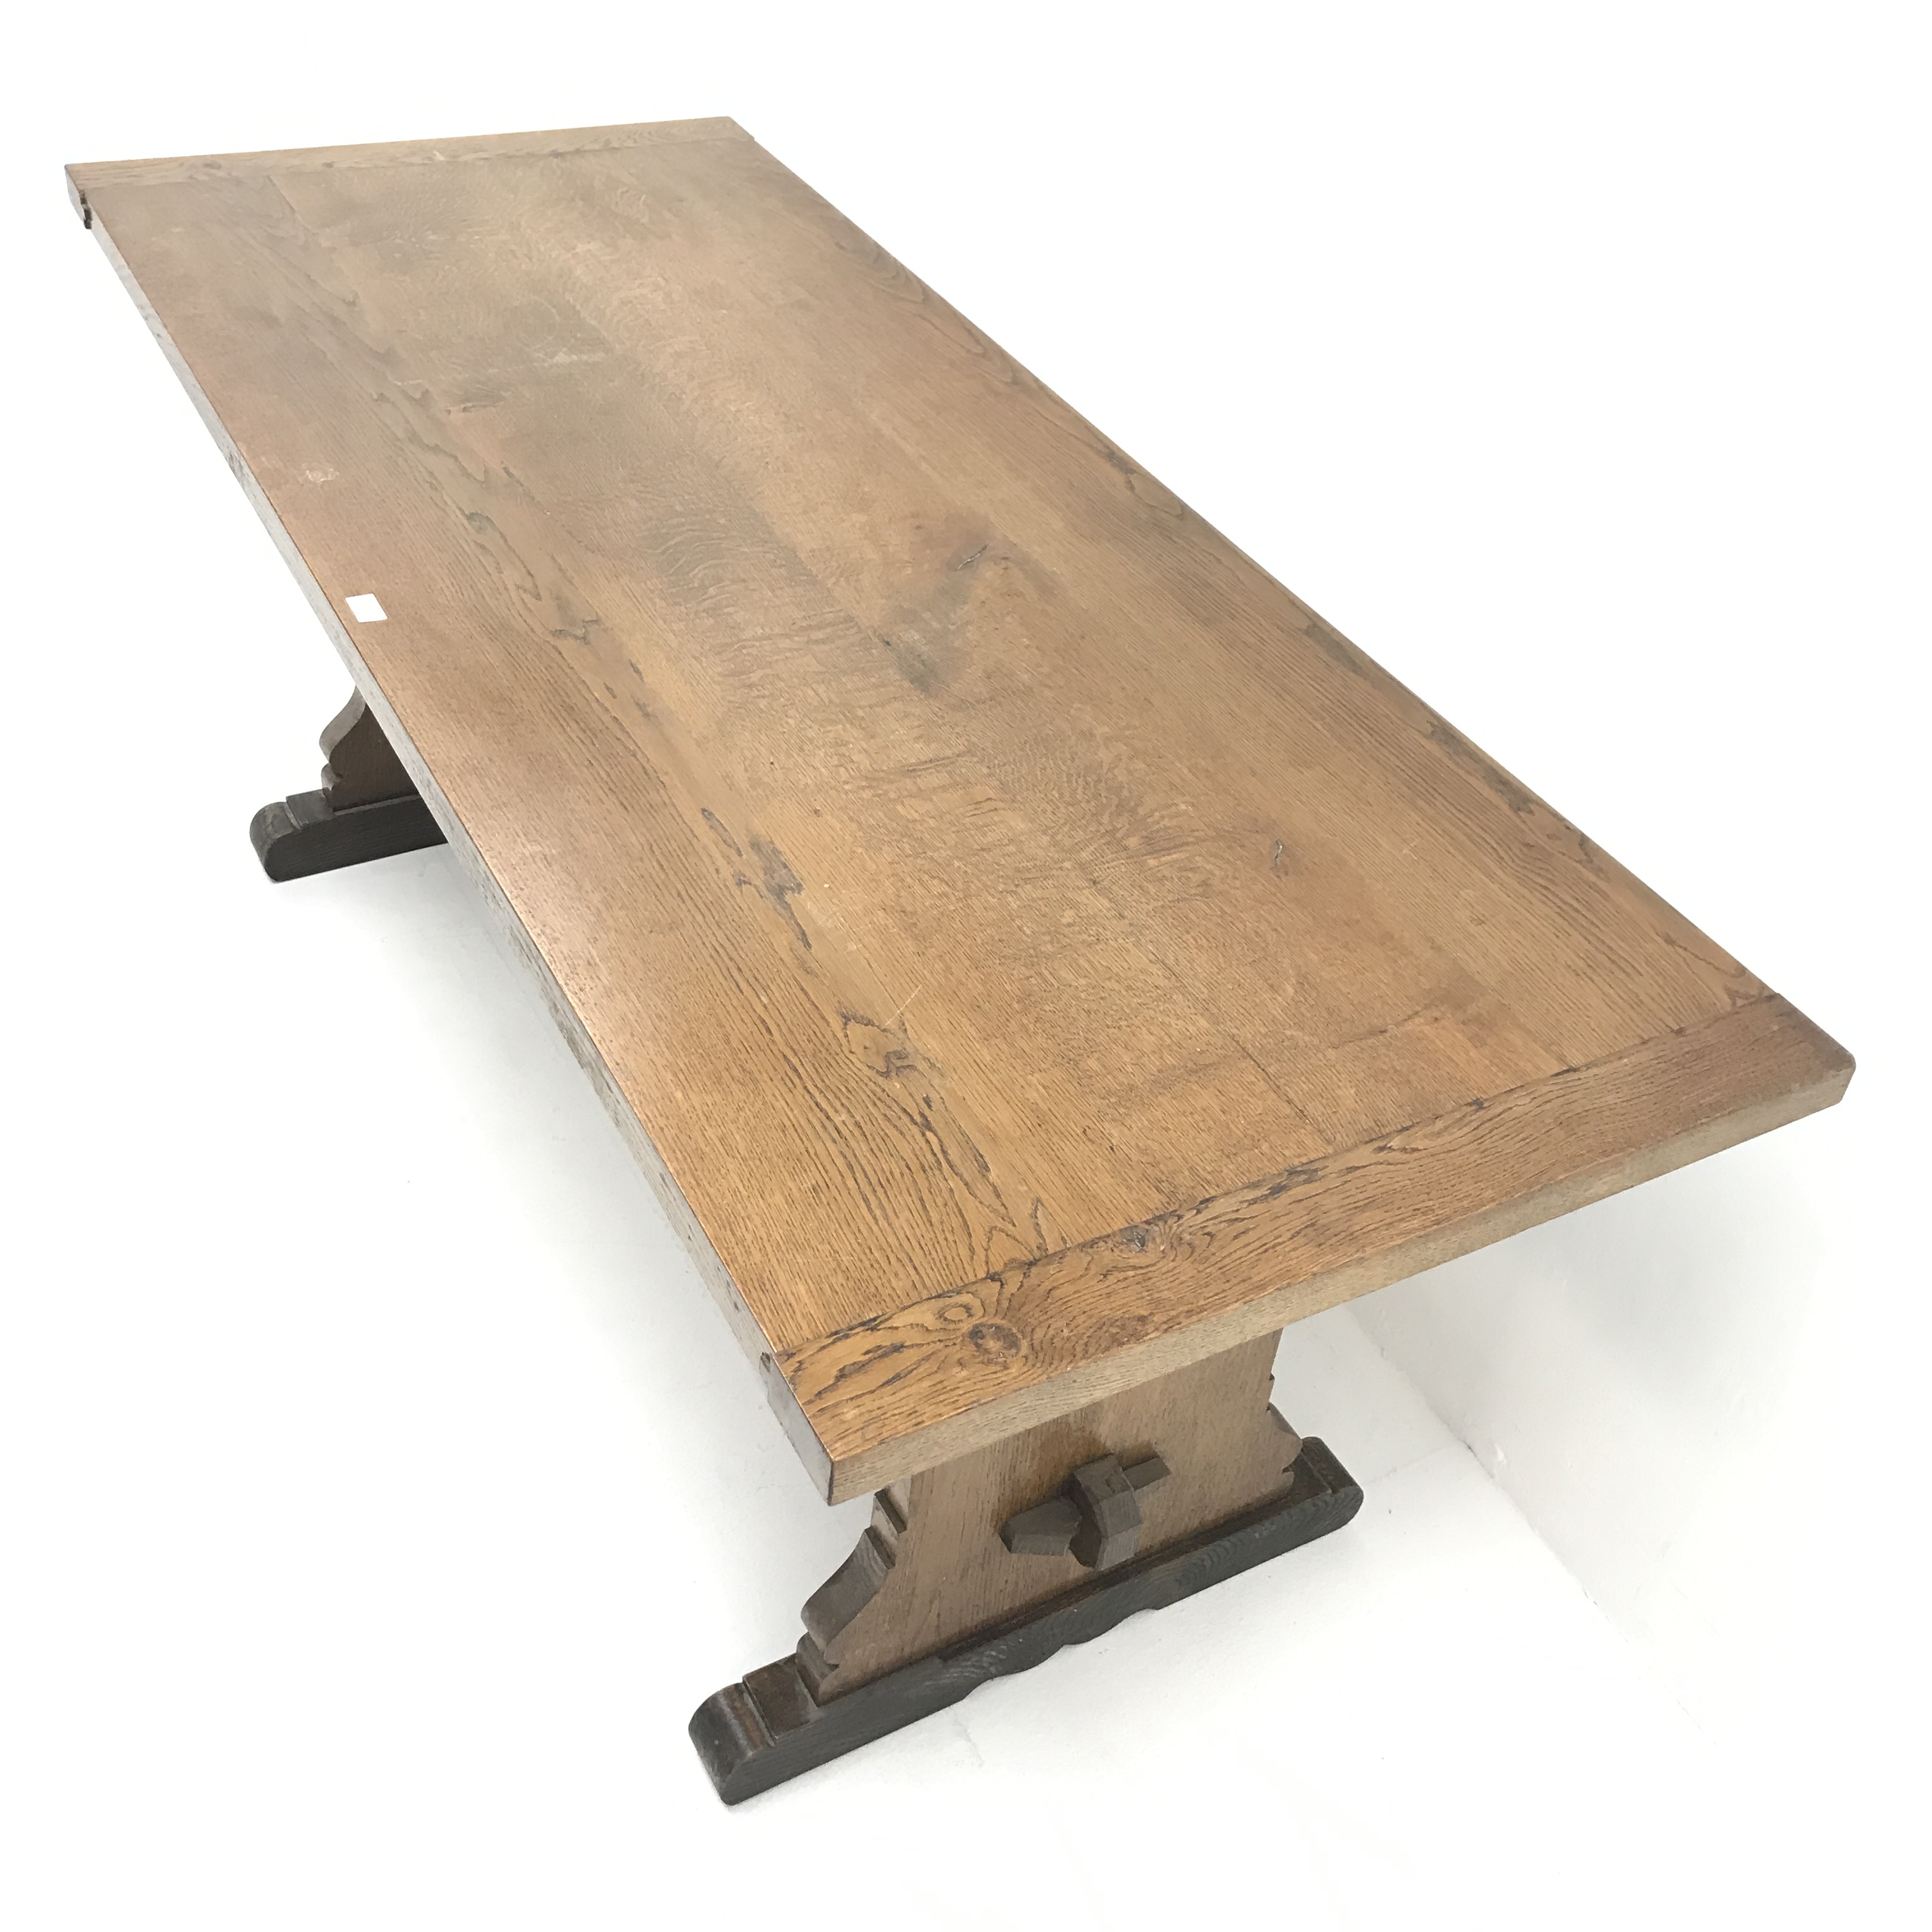 20th century oak refectory table, shaped solid end supports joined by single undertier, sledge feet, - Image 8 of 8